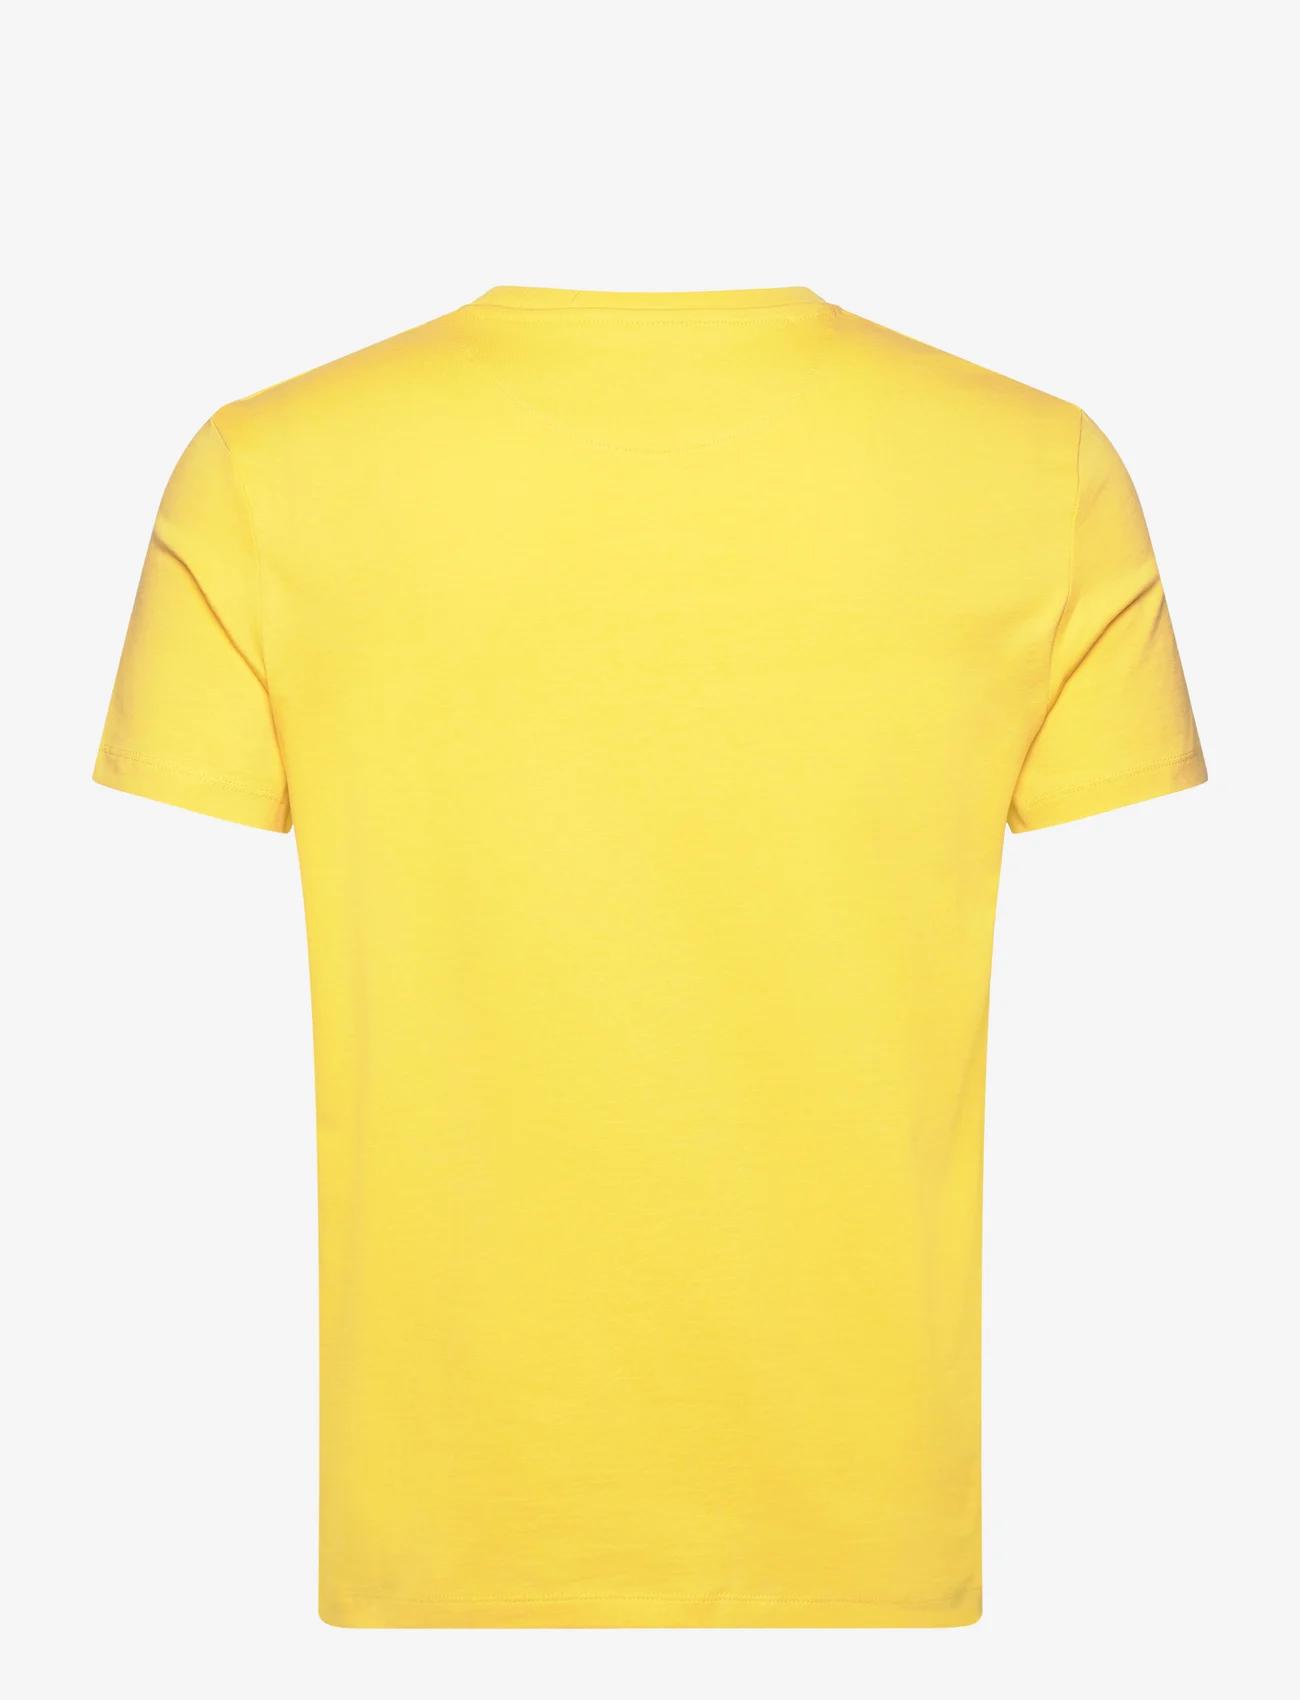 Timberland - DUNSTAN RIVER Short Sleeve Tee MIMOSA - lowest prices - mimosa - 1